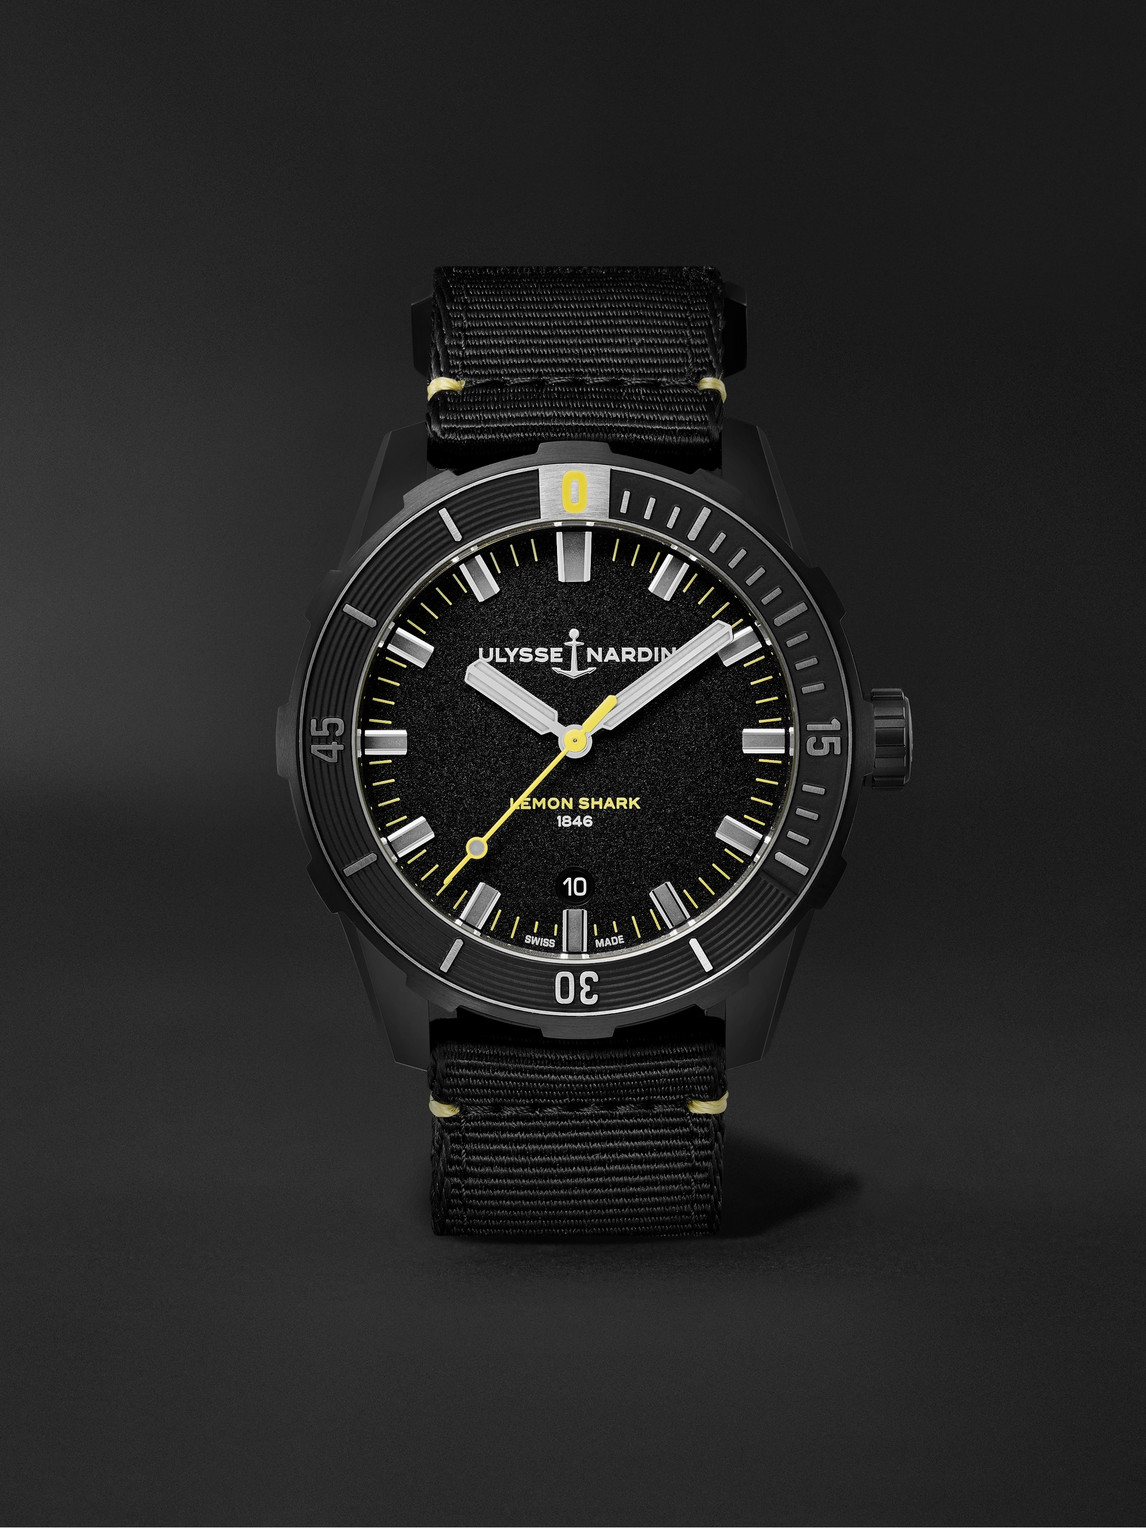 Ulysse Nardin Diver Limited Edition Automatic 42mm Blackened Stainless Steel And Webbing Watch, Ref. No. 8163-175l